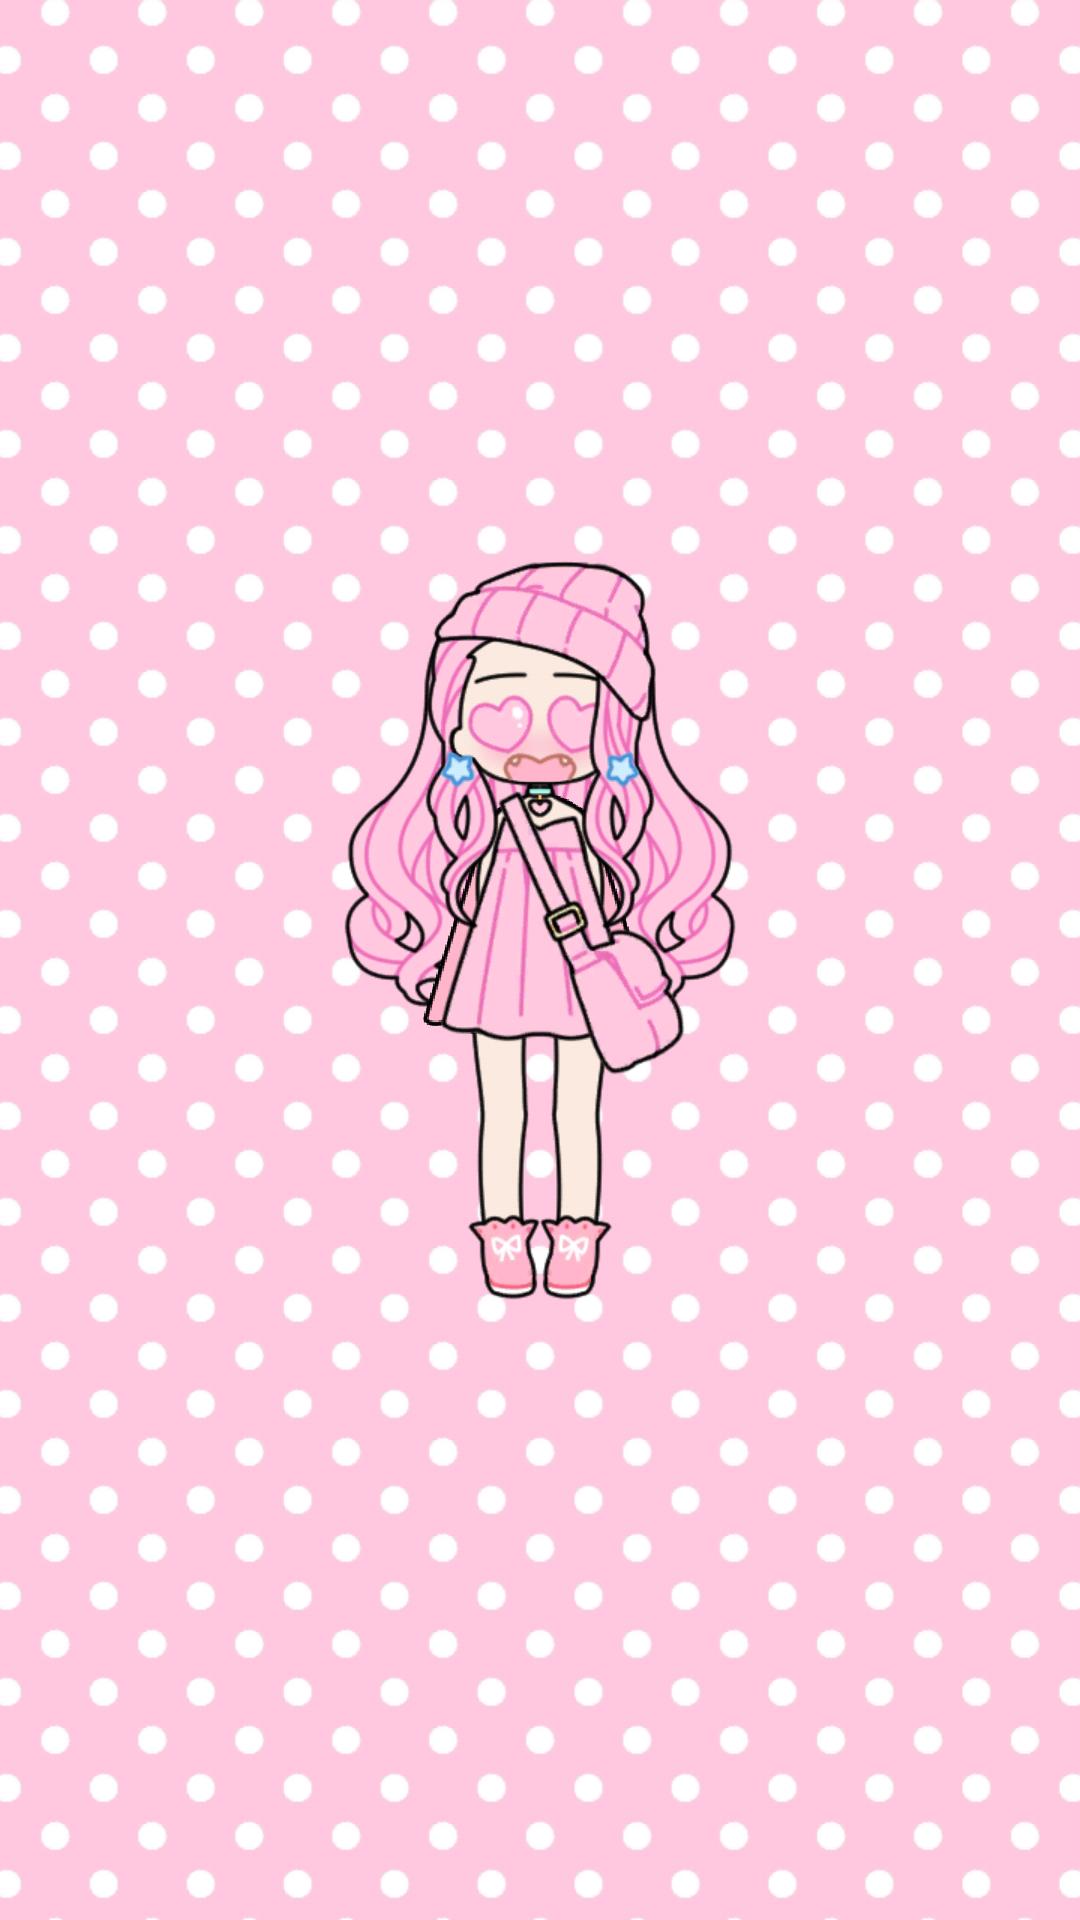 1girl child cute heart heart_eyes love pink simple_background